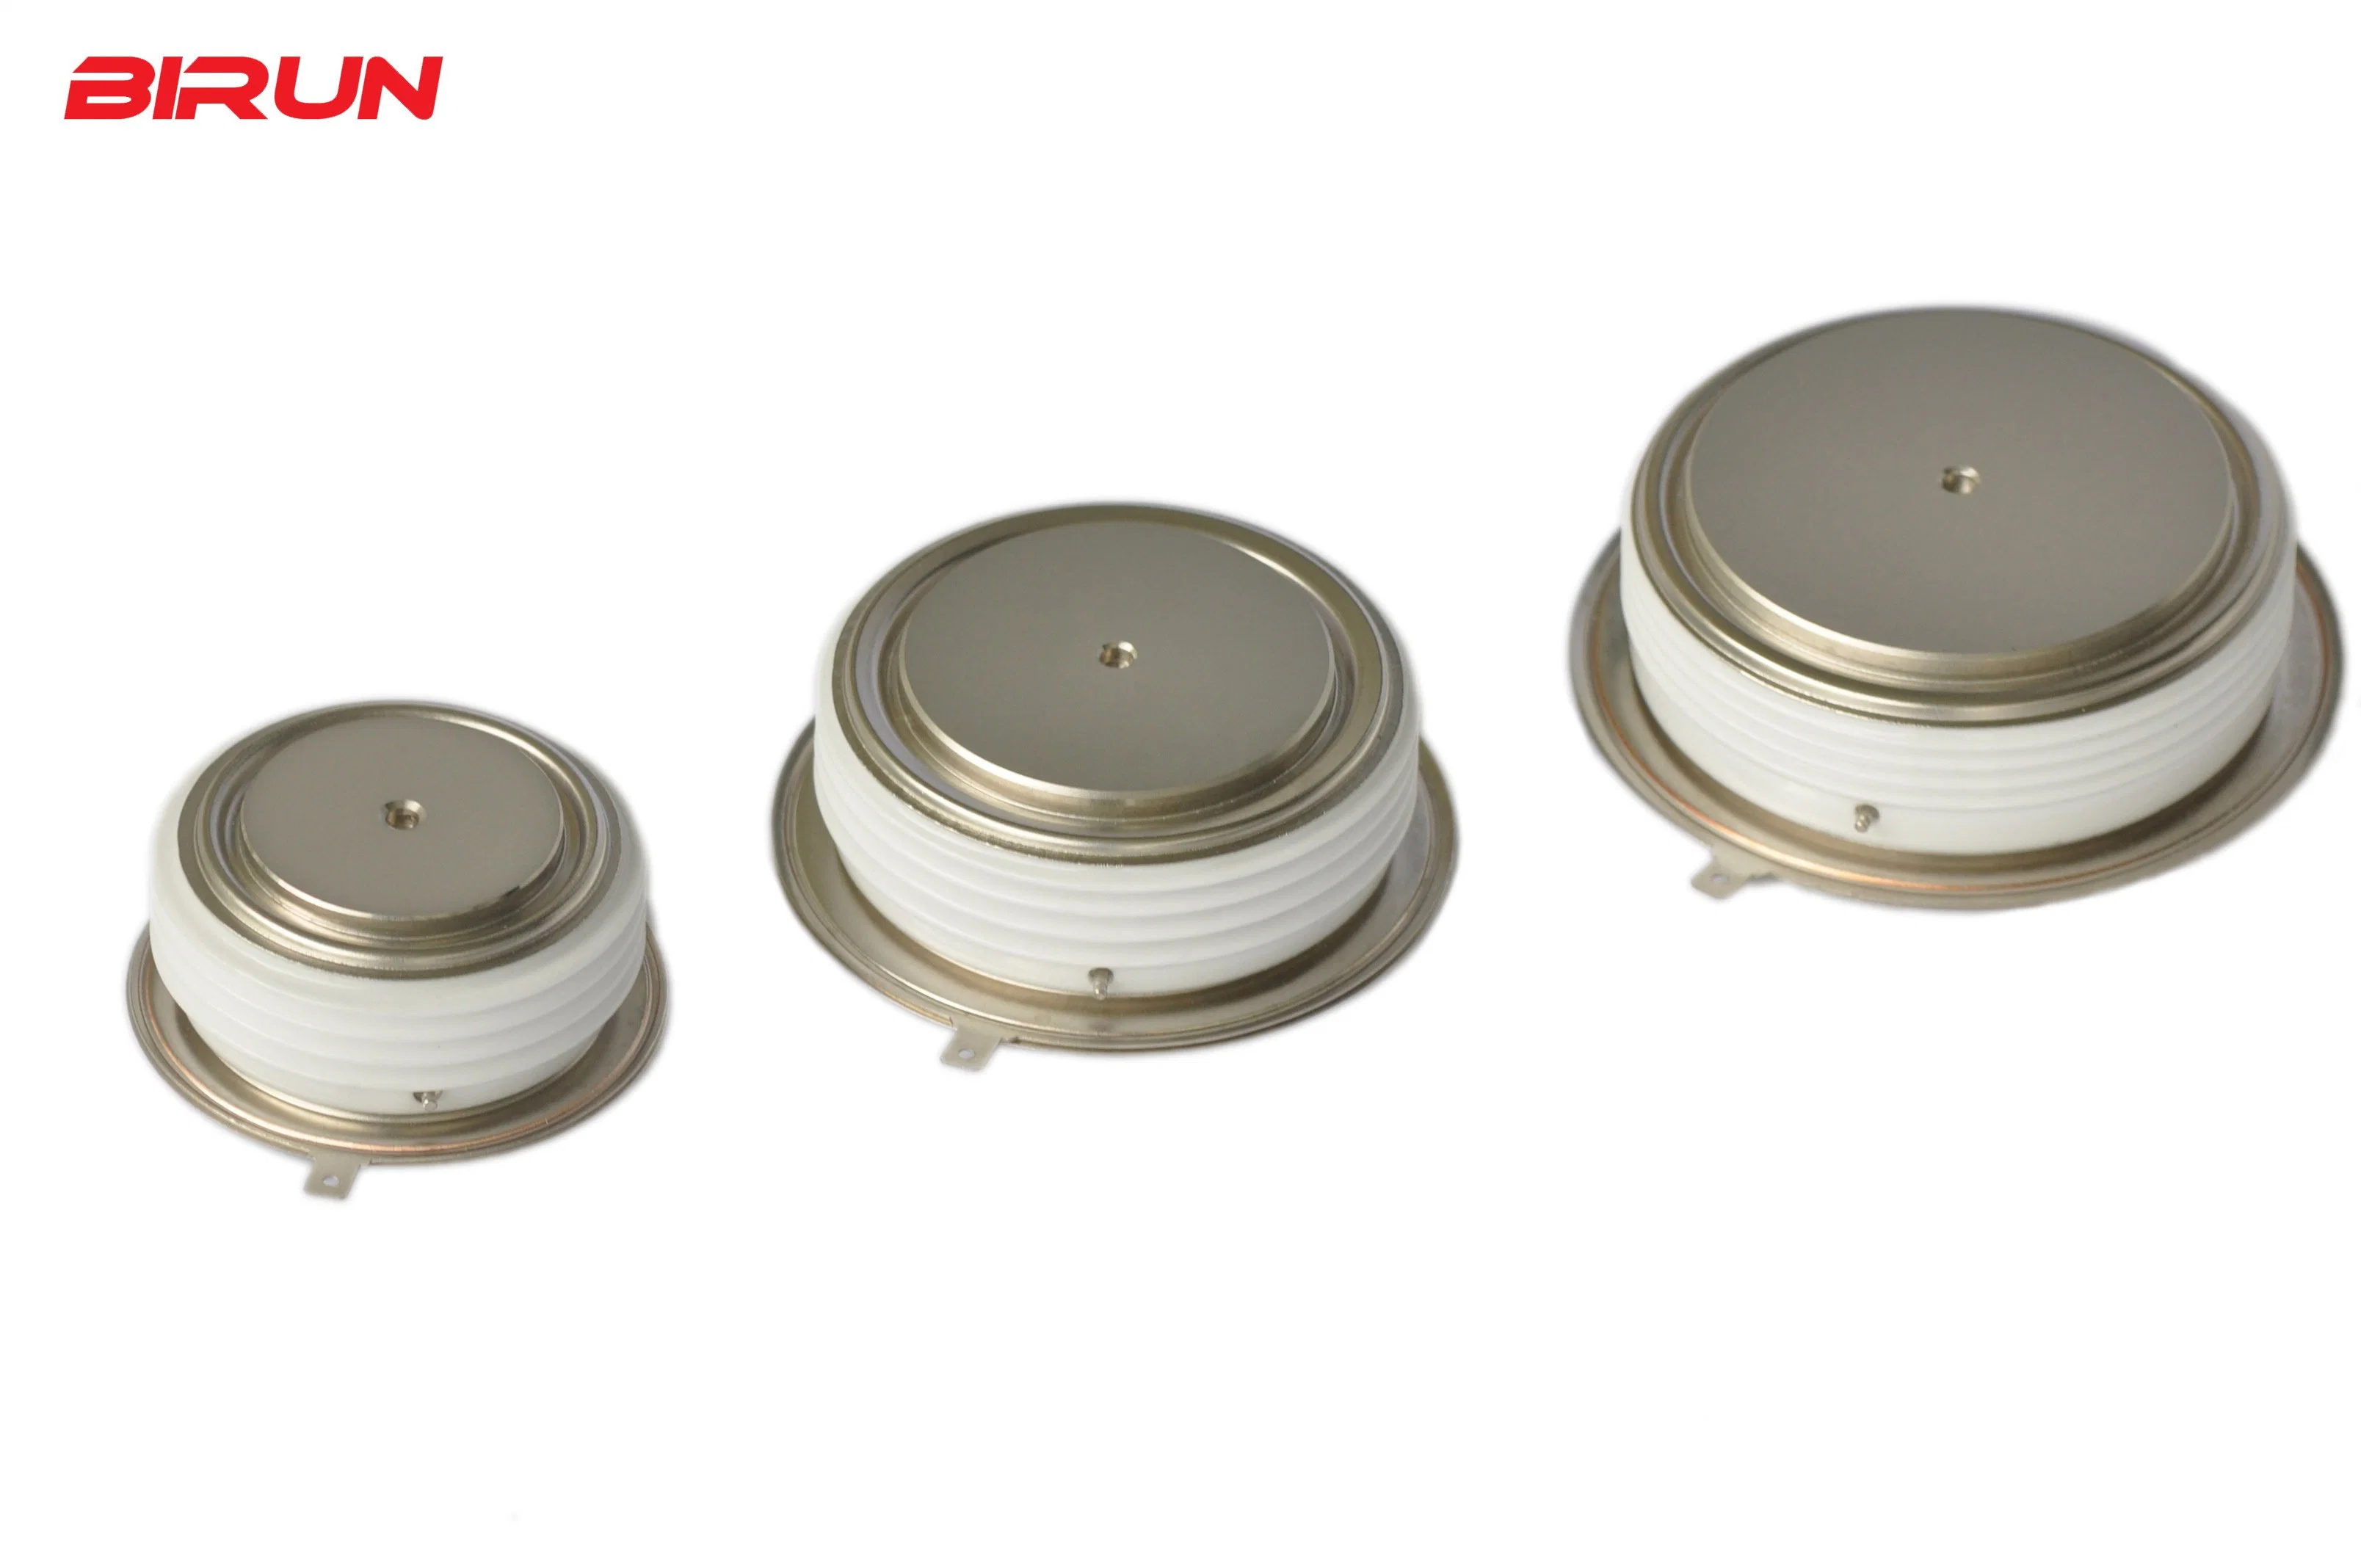 SCR Phase Control Thyristors Silicon Disc Capsule Types Kp1000A/600~1800V